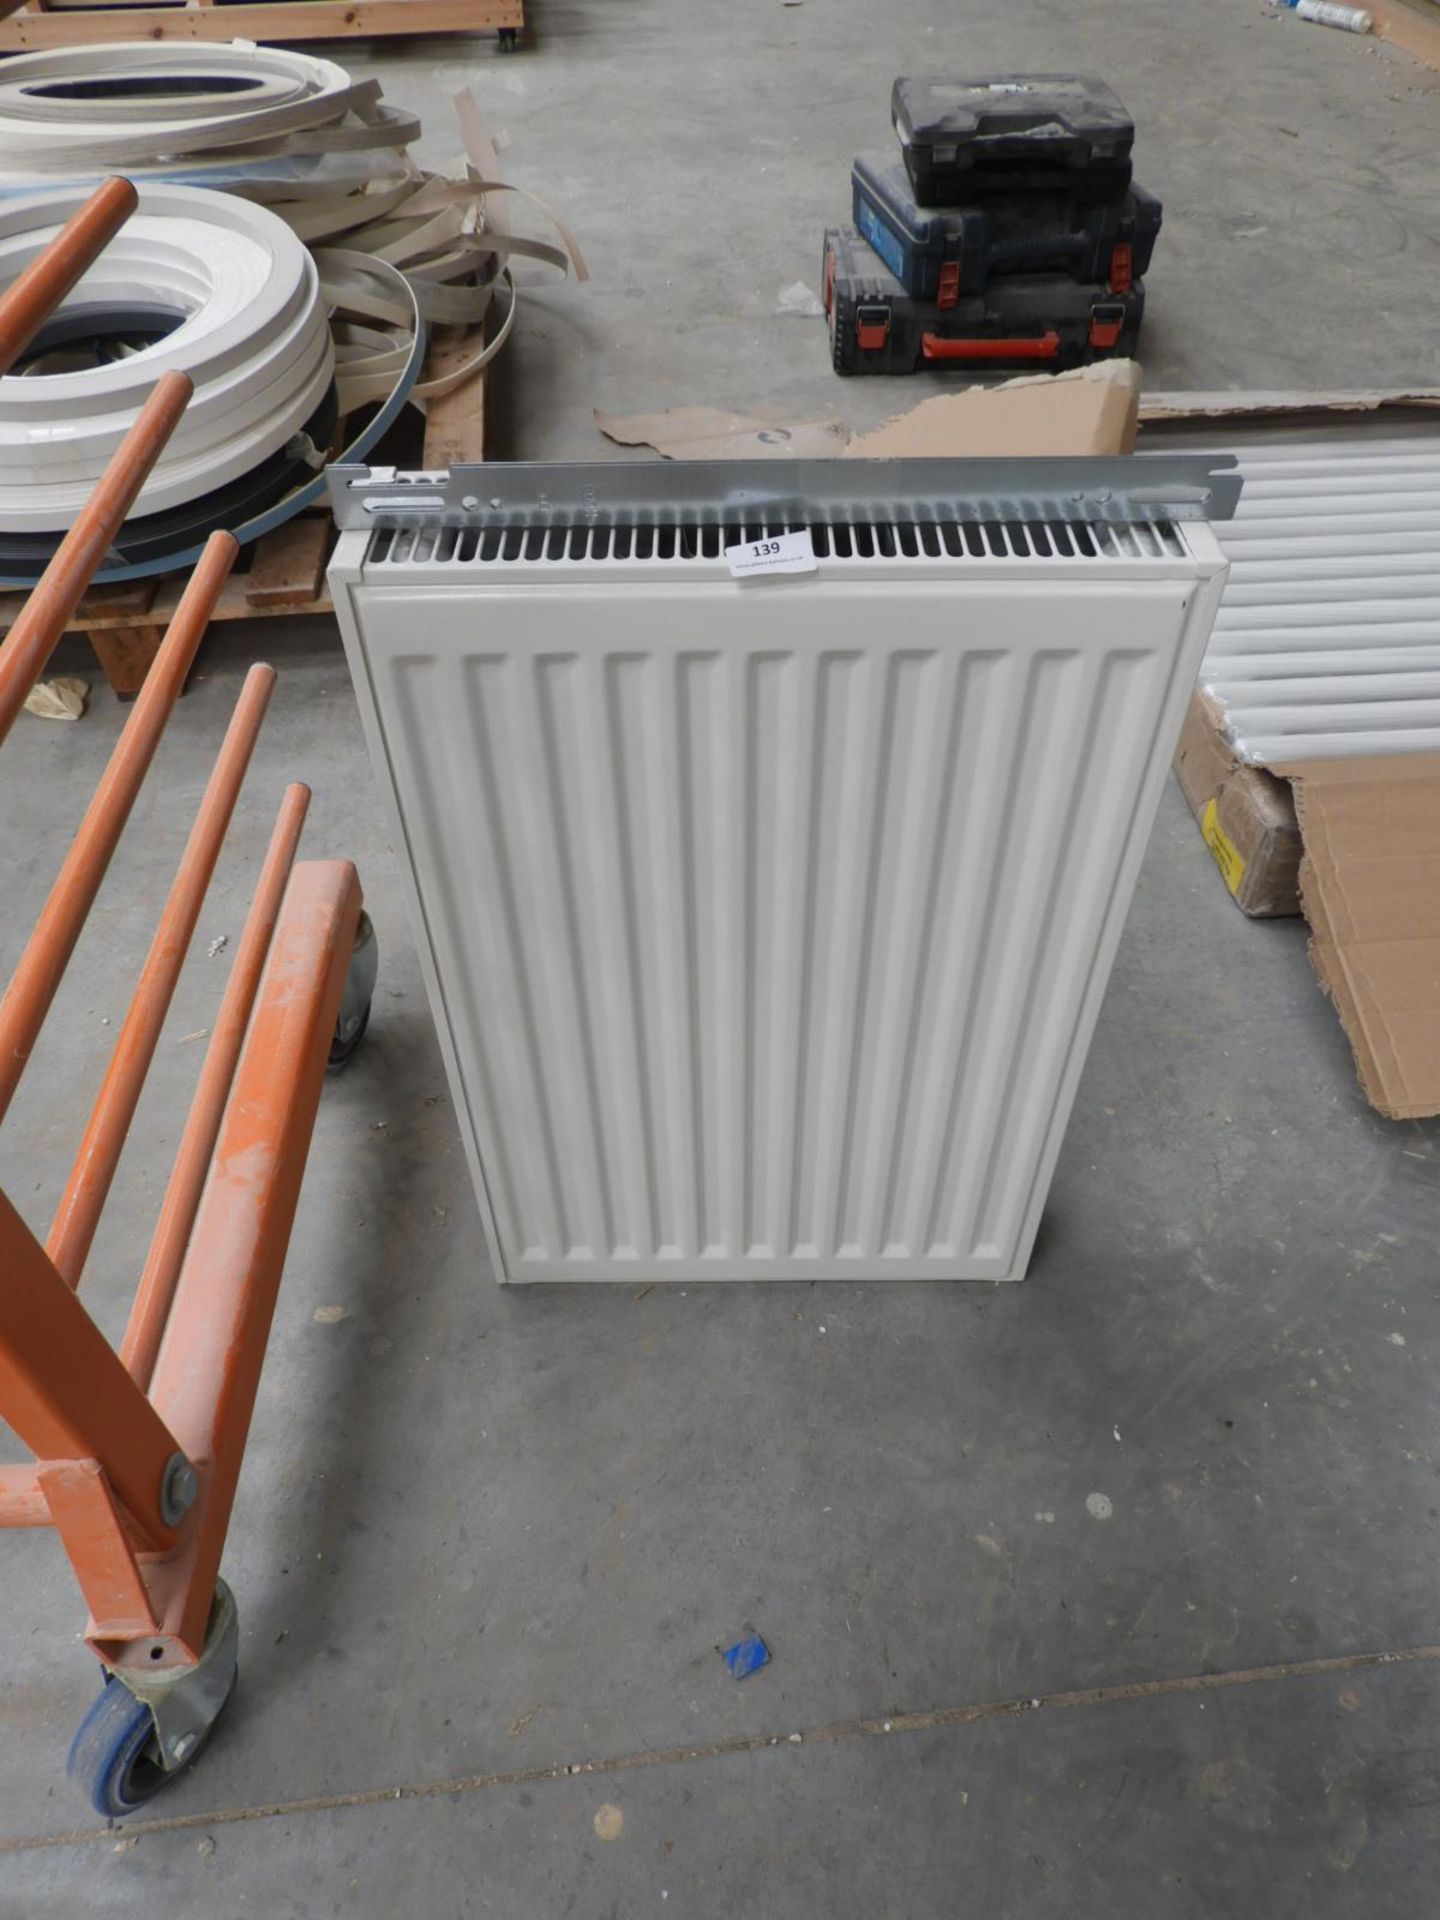 *Domestic Central Heating Radiator